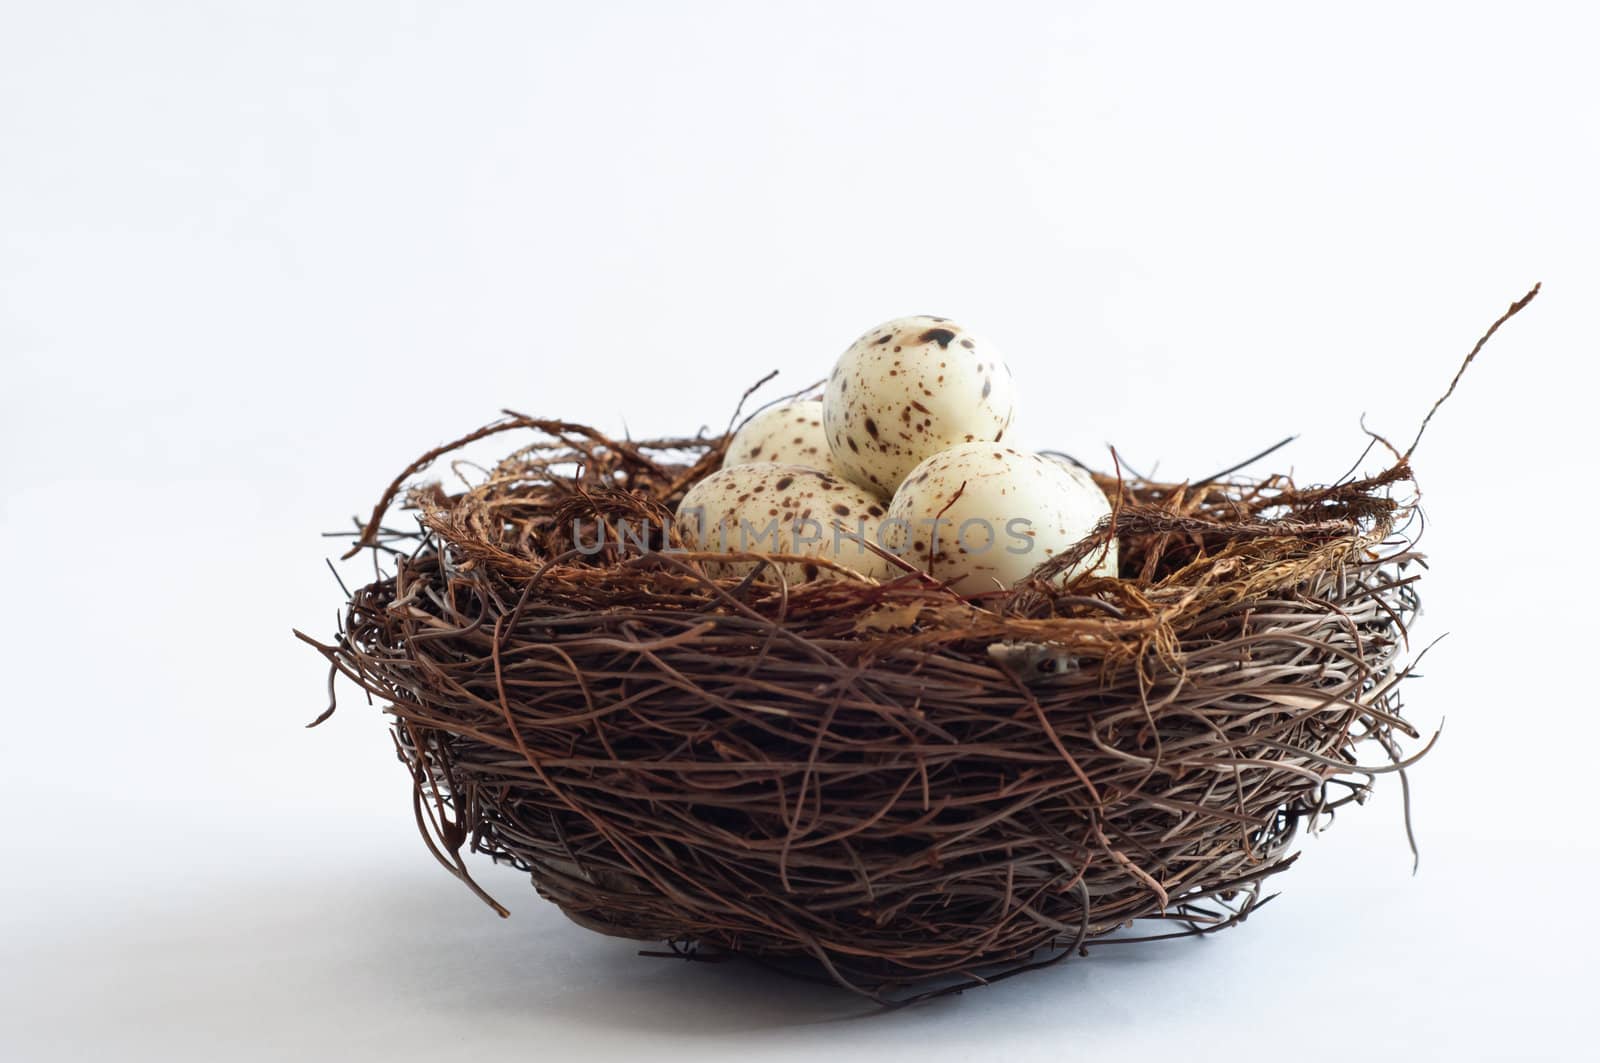 A bird nest made from twigs, containing light speckled fake eggs.